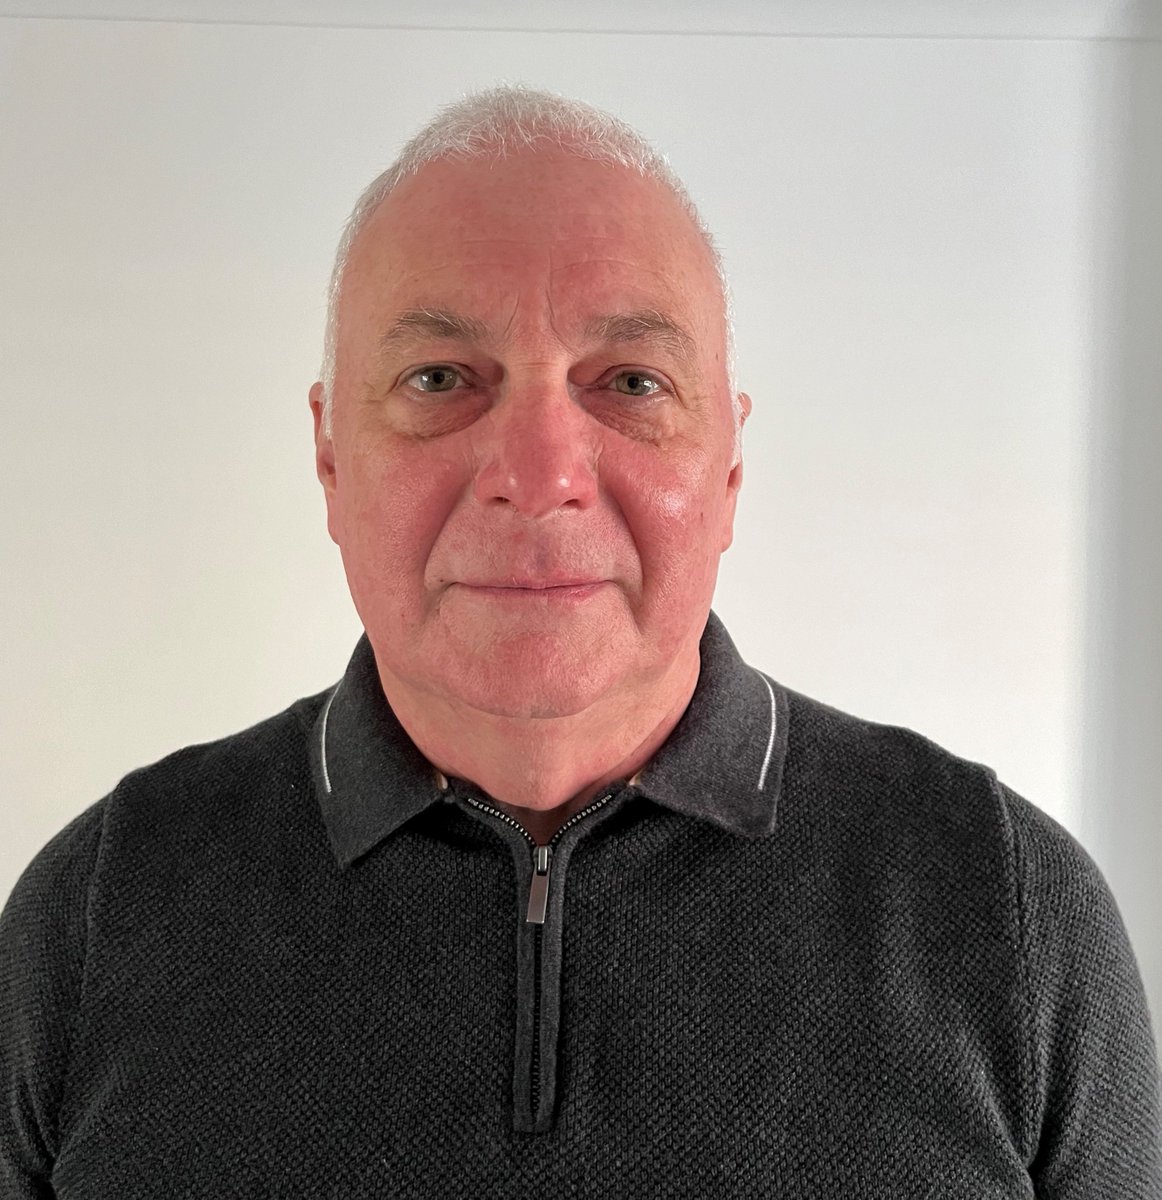 ⭐ We are delighted to welcome John McKnight to our Board of dedicated Trustees. ⭐ John brings with him a wide range of experience starting his career in engineering & then moving into marketing. ⭐ Welcome to the team John! ⭐ Find out more here: buff.ly/36RChKV